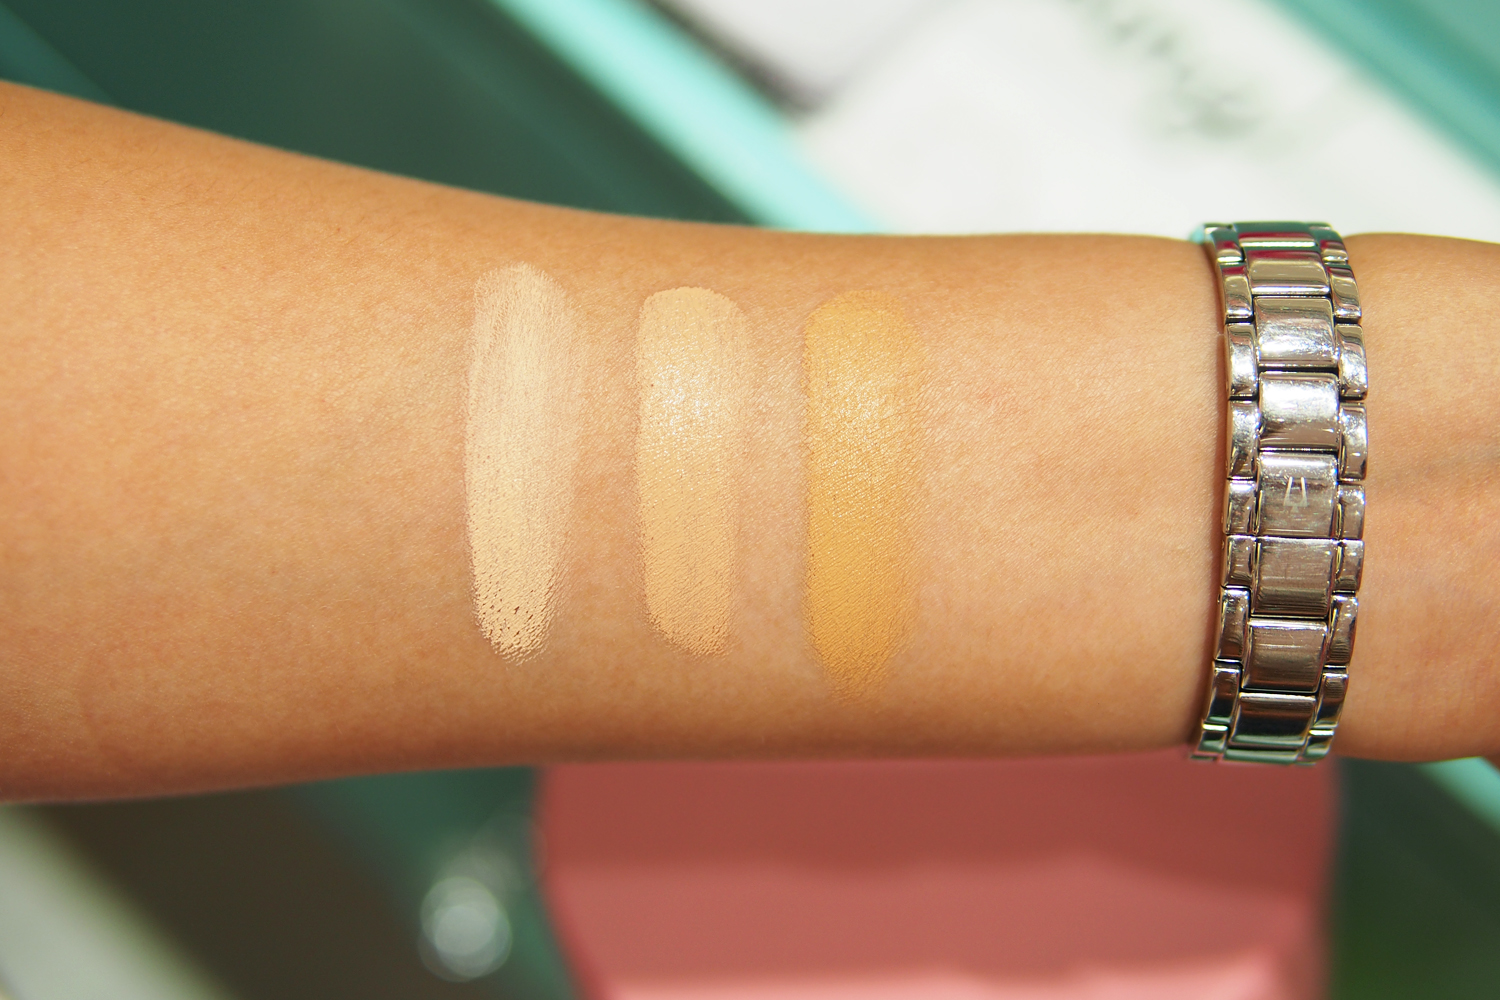 Mejeriprodukter Mangle Smelte Which Benefit Boi-ing Concealer is right for you? A primer on the new line  — Project Vanity